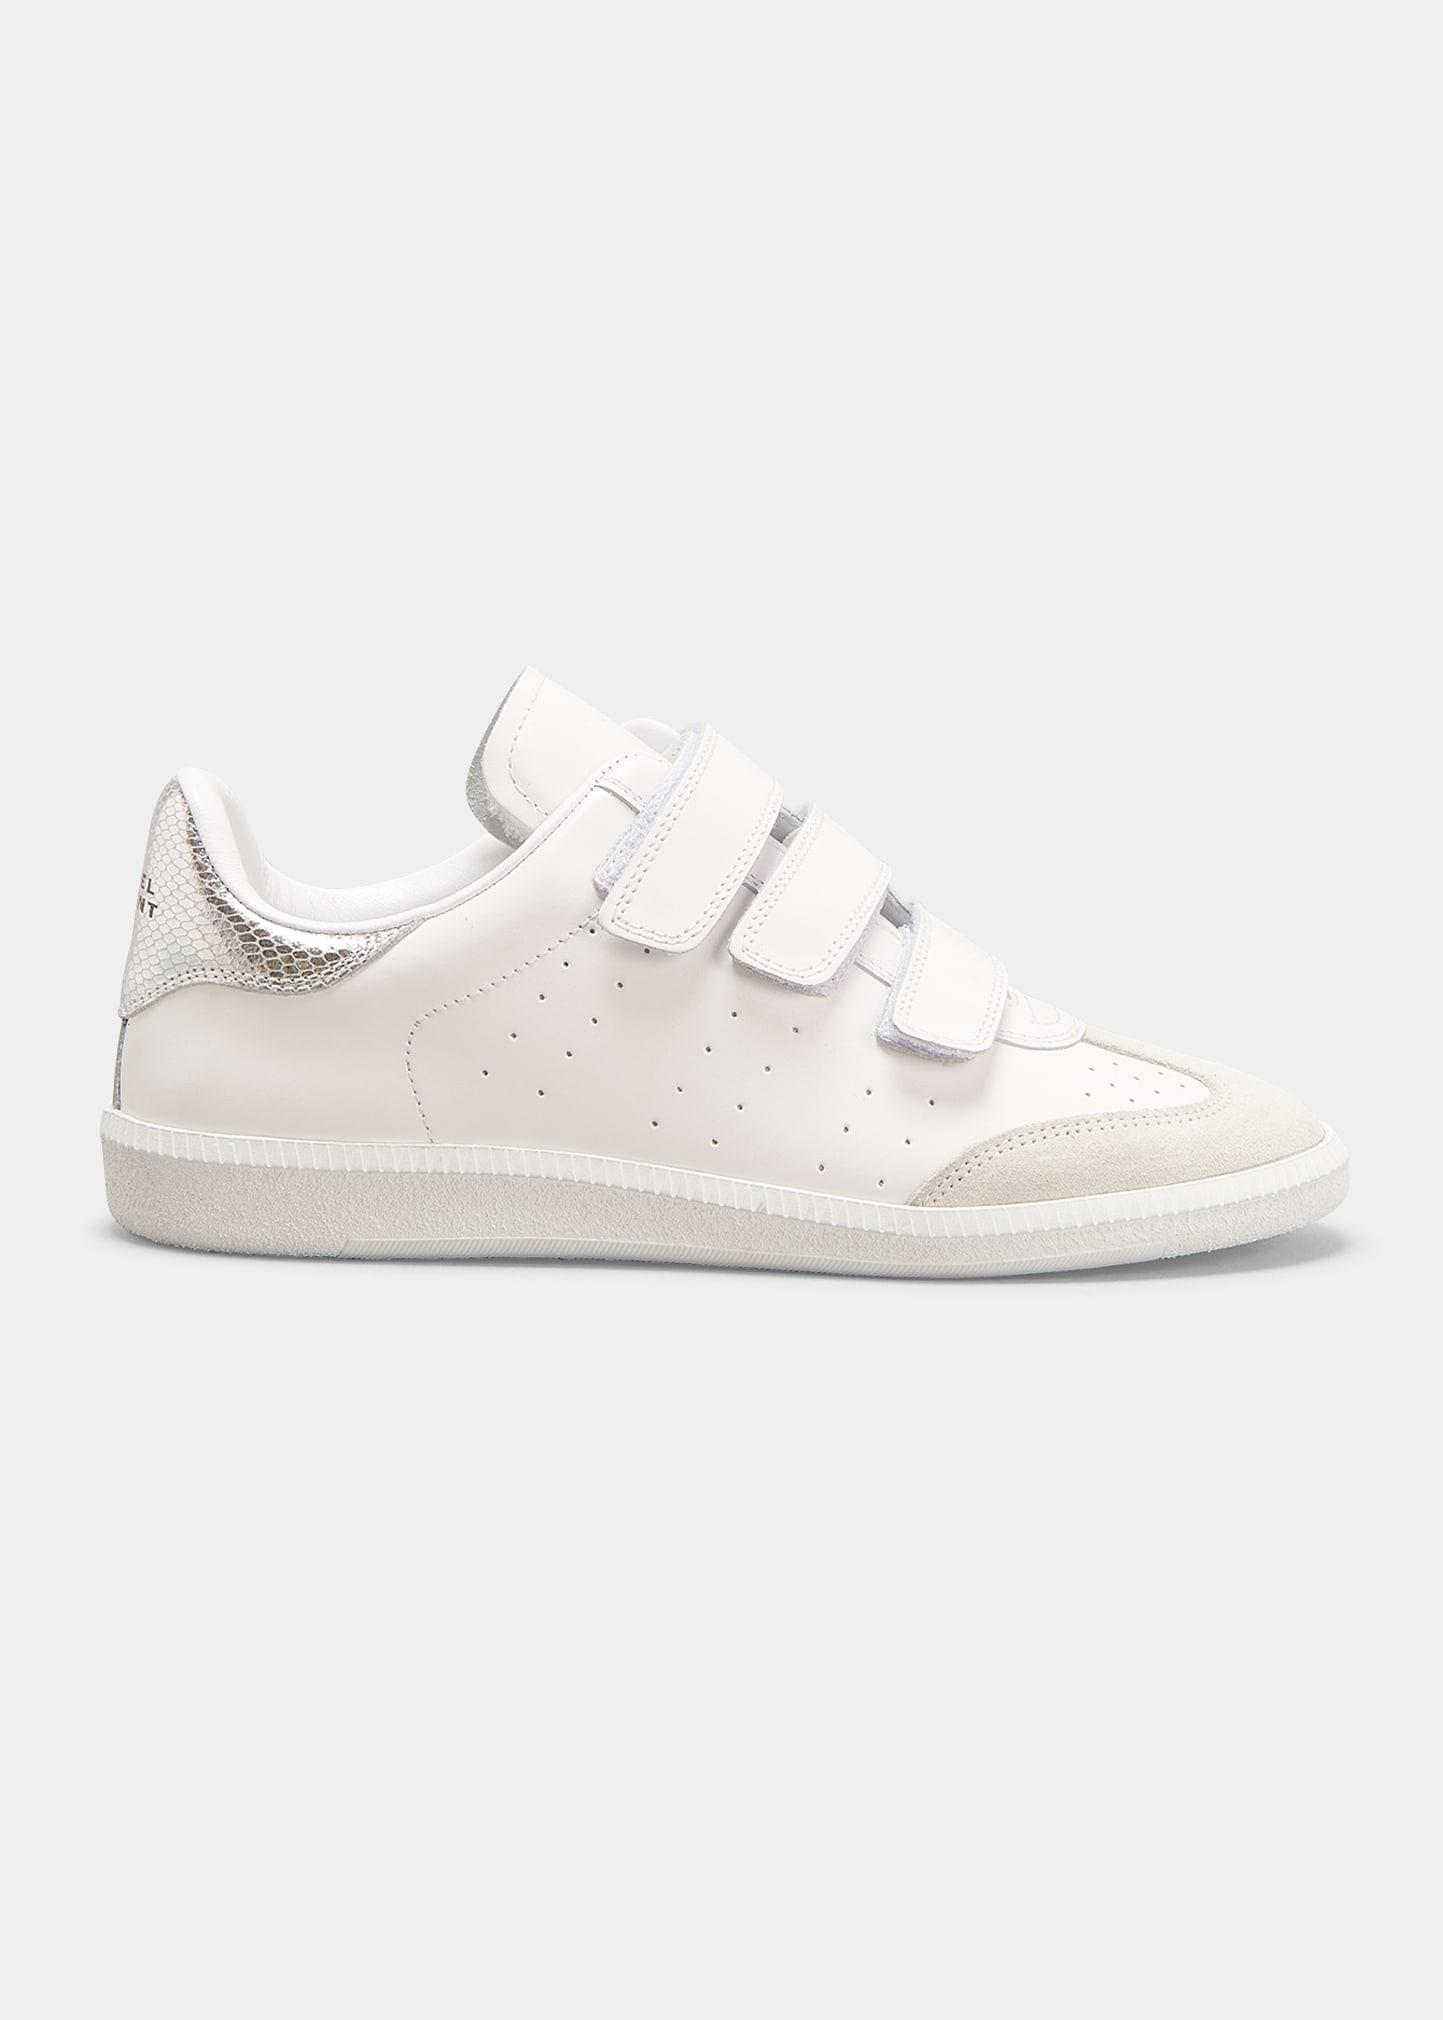 Isabel Marant Beth Mixed Leather Grip Tennis Sneakers in White | Lyst